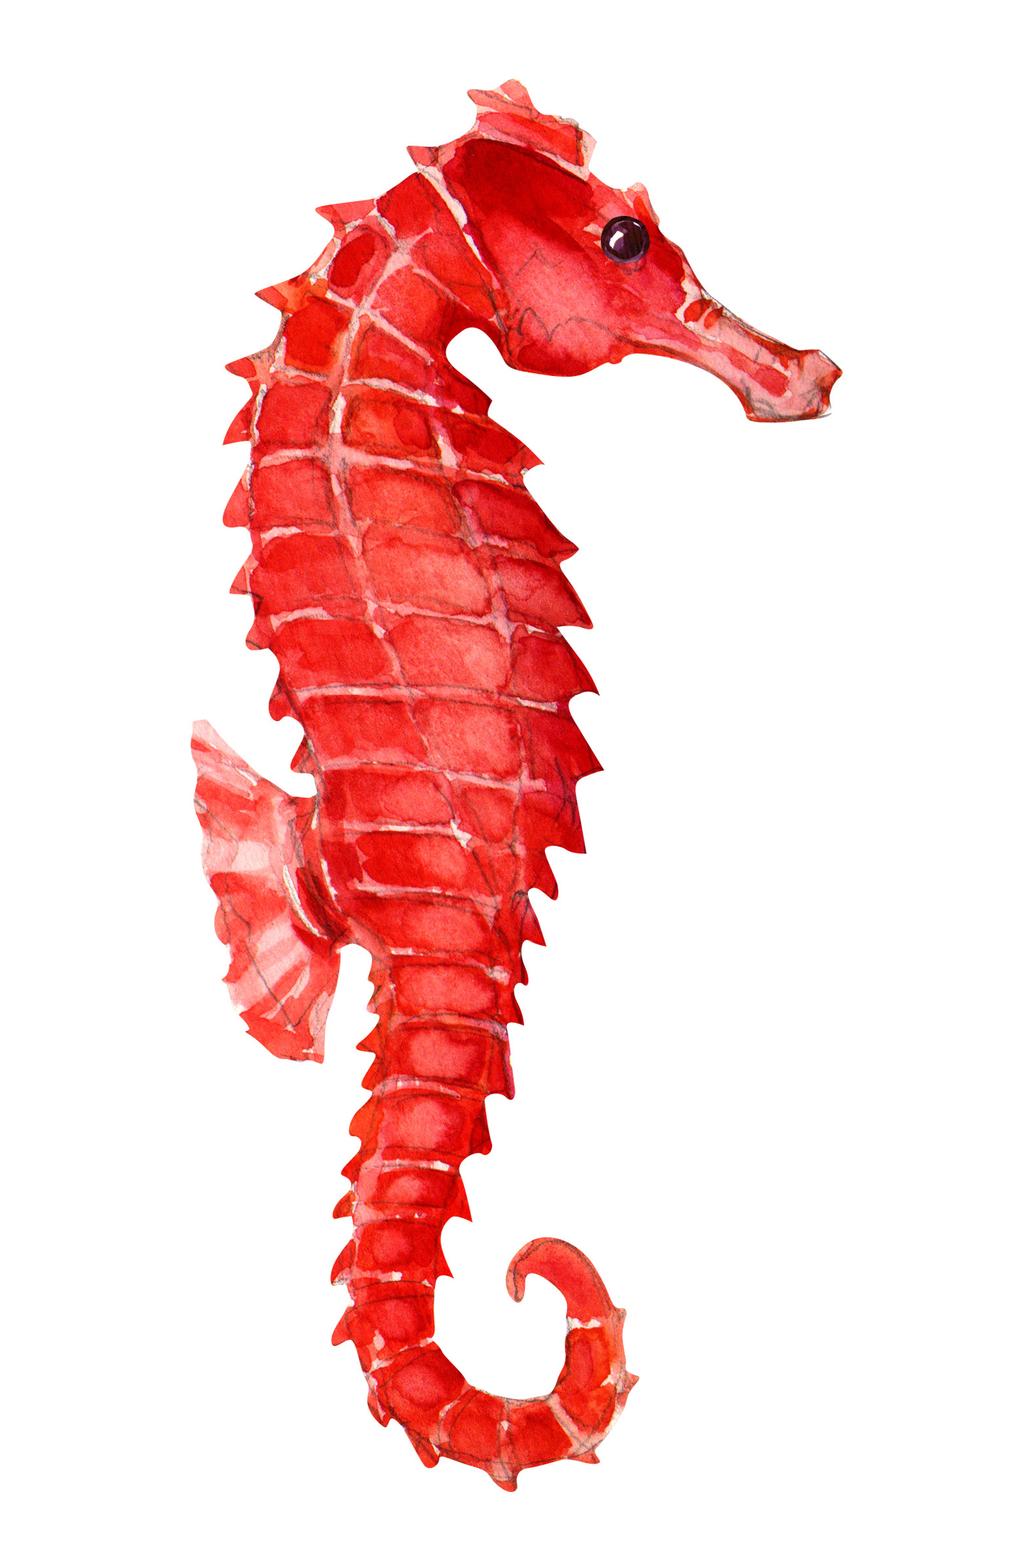 SECTION 4 Seahorse There are 5 different stages in the seahorse life cycle. Put the seahorse life cycle in the correct order by placing a number next to each stage.